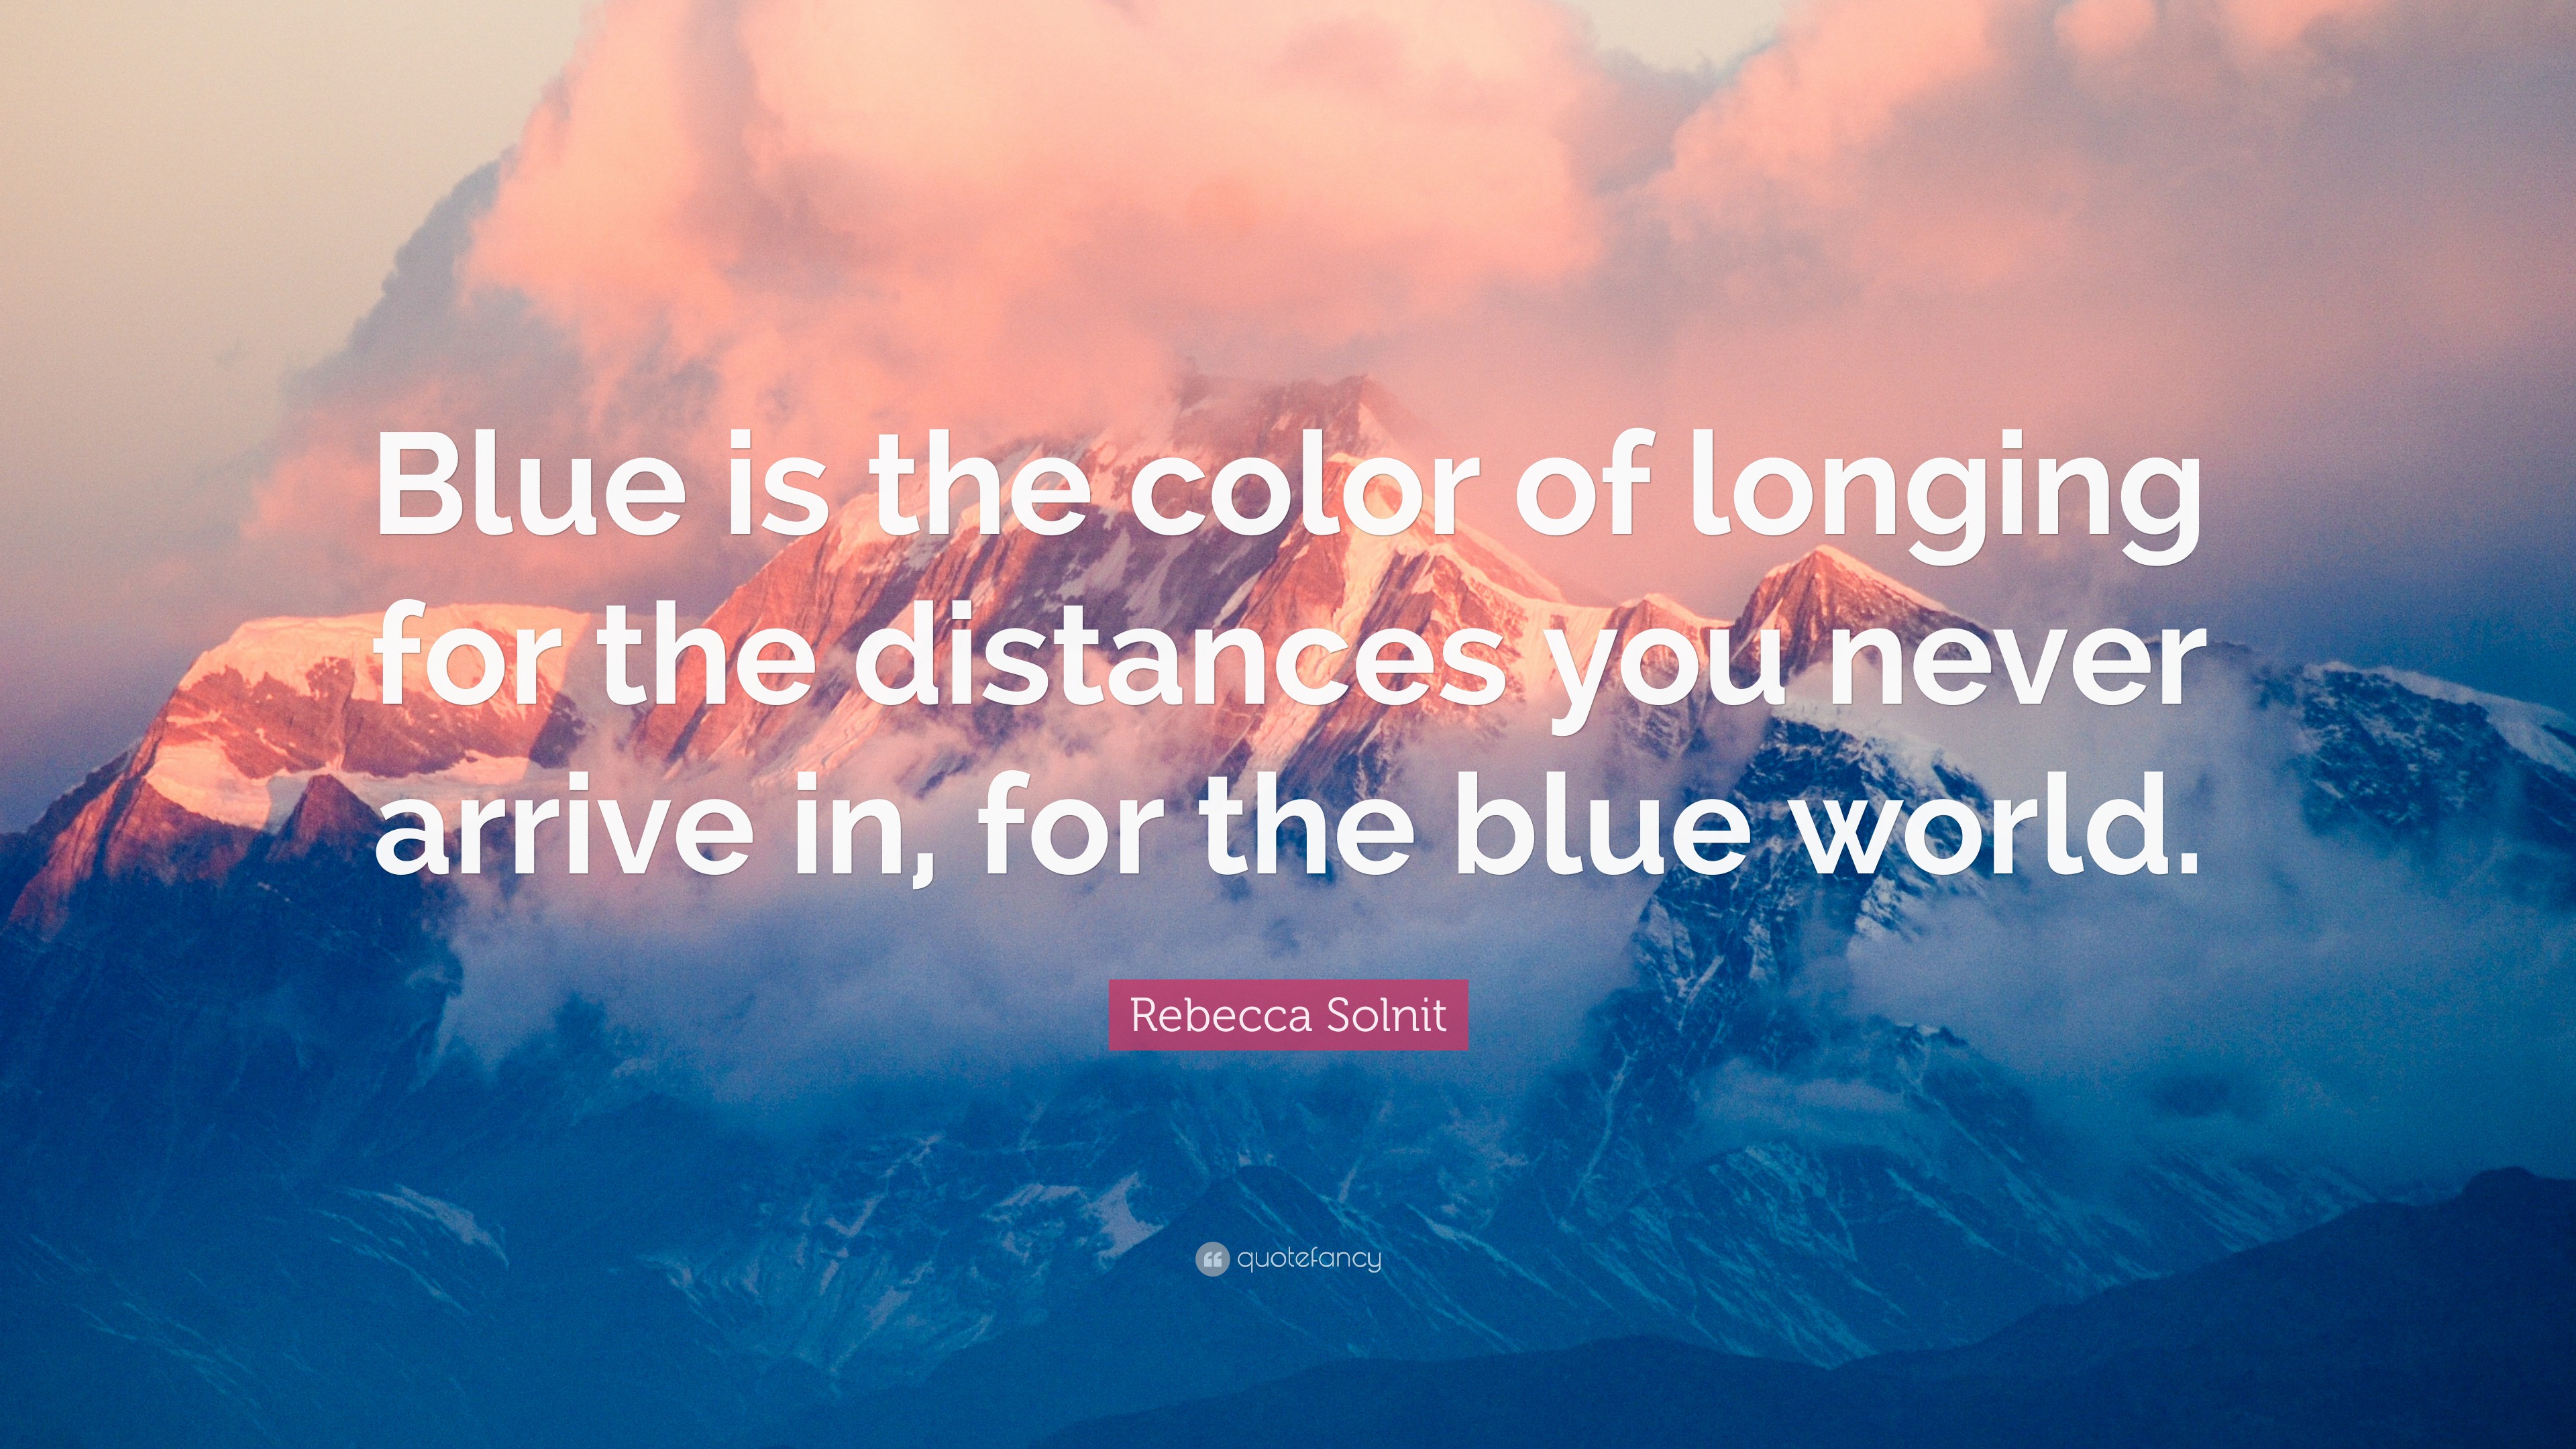 Rebecca Solnit Quote: “Blue is the color of longing for the